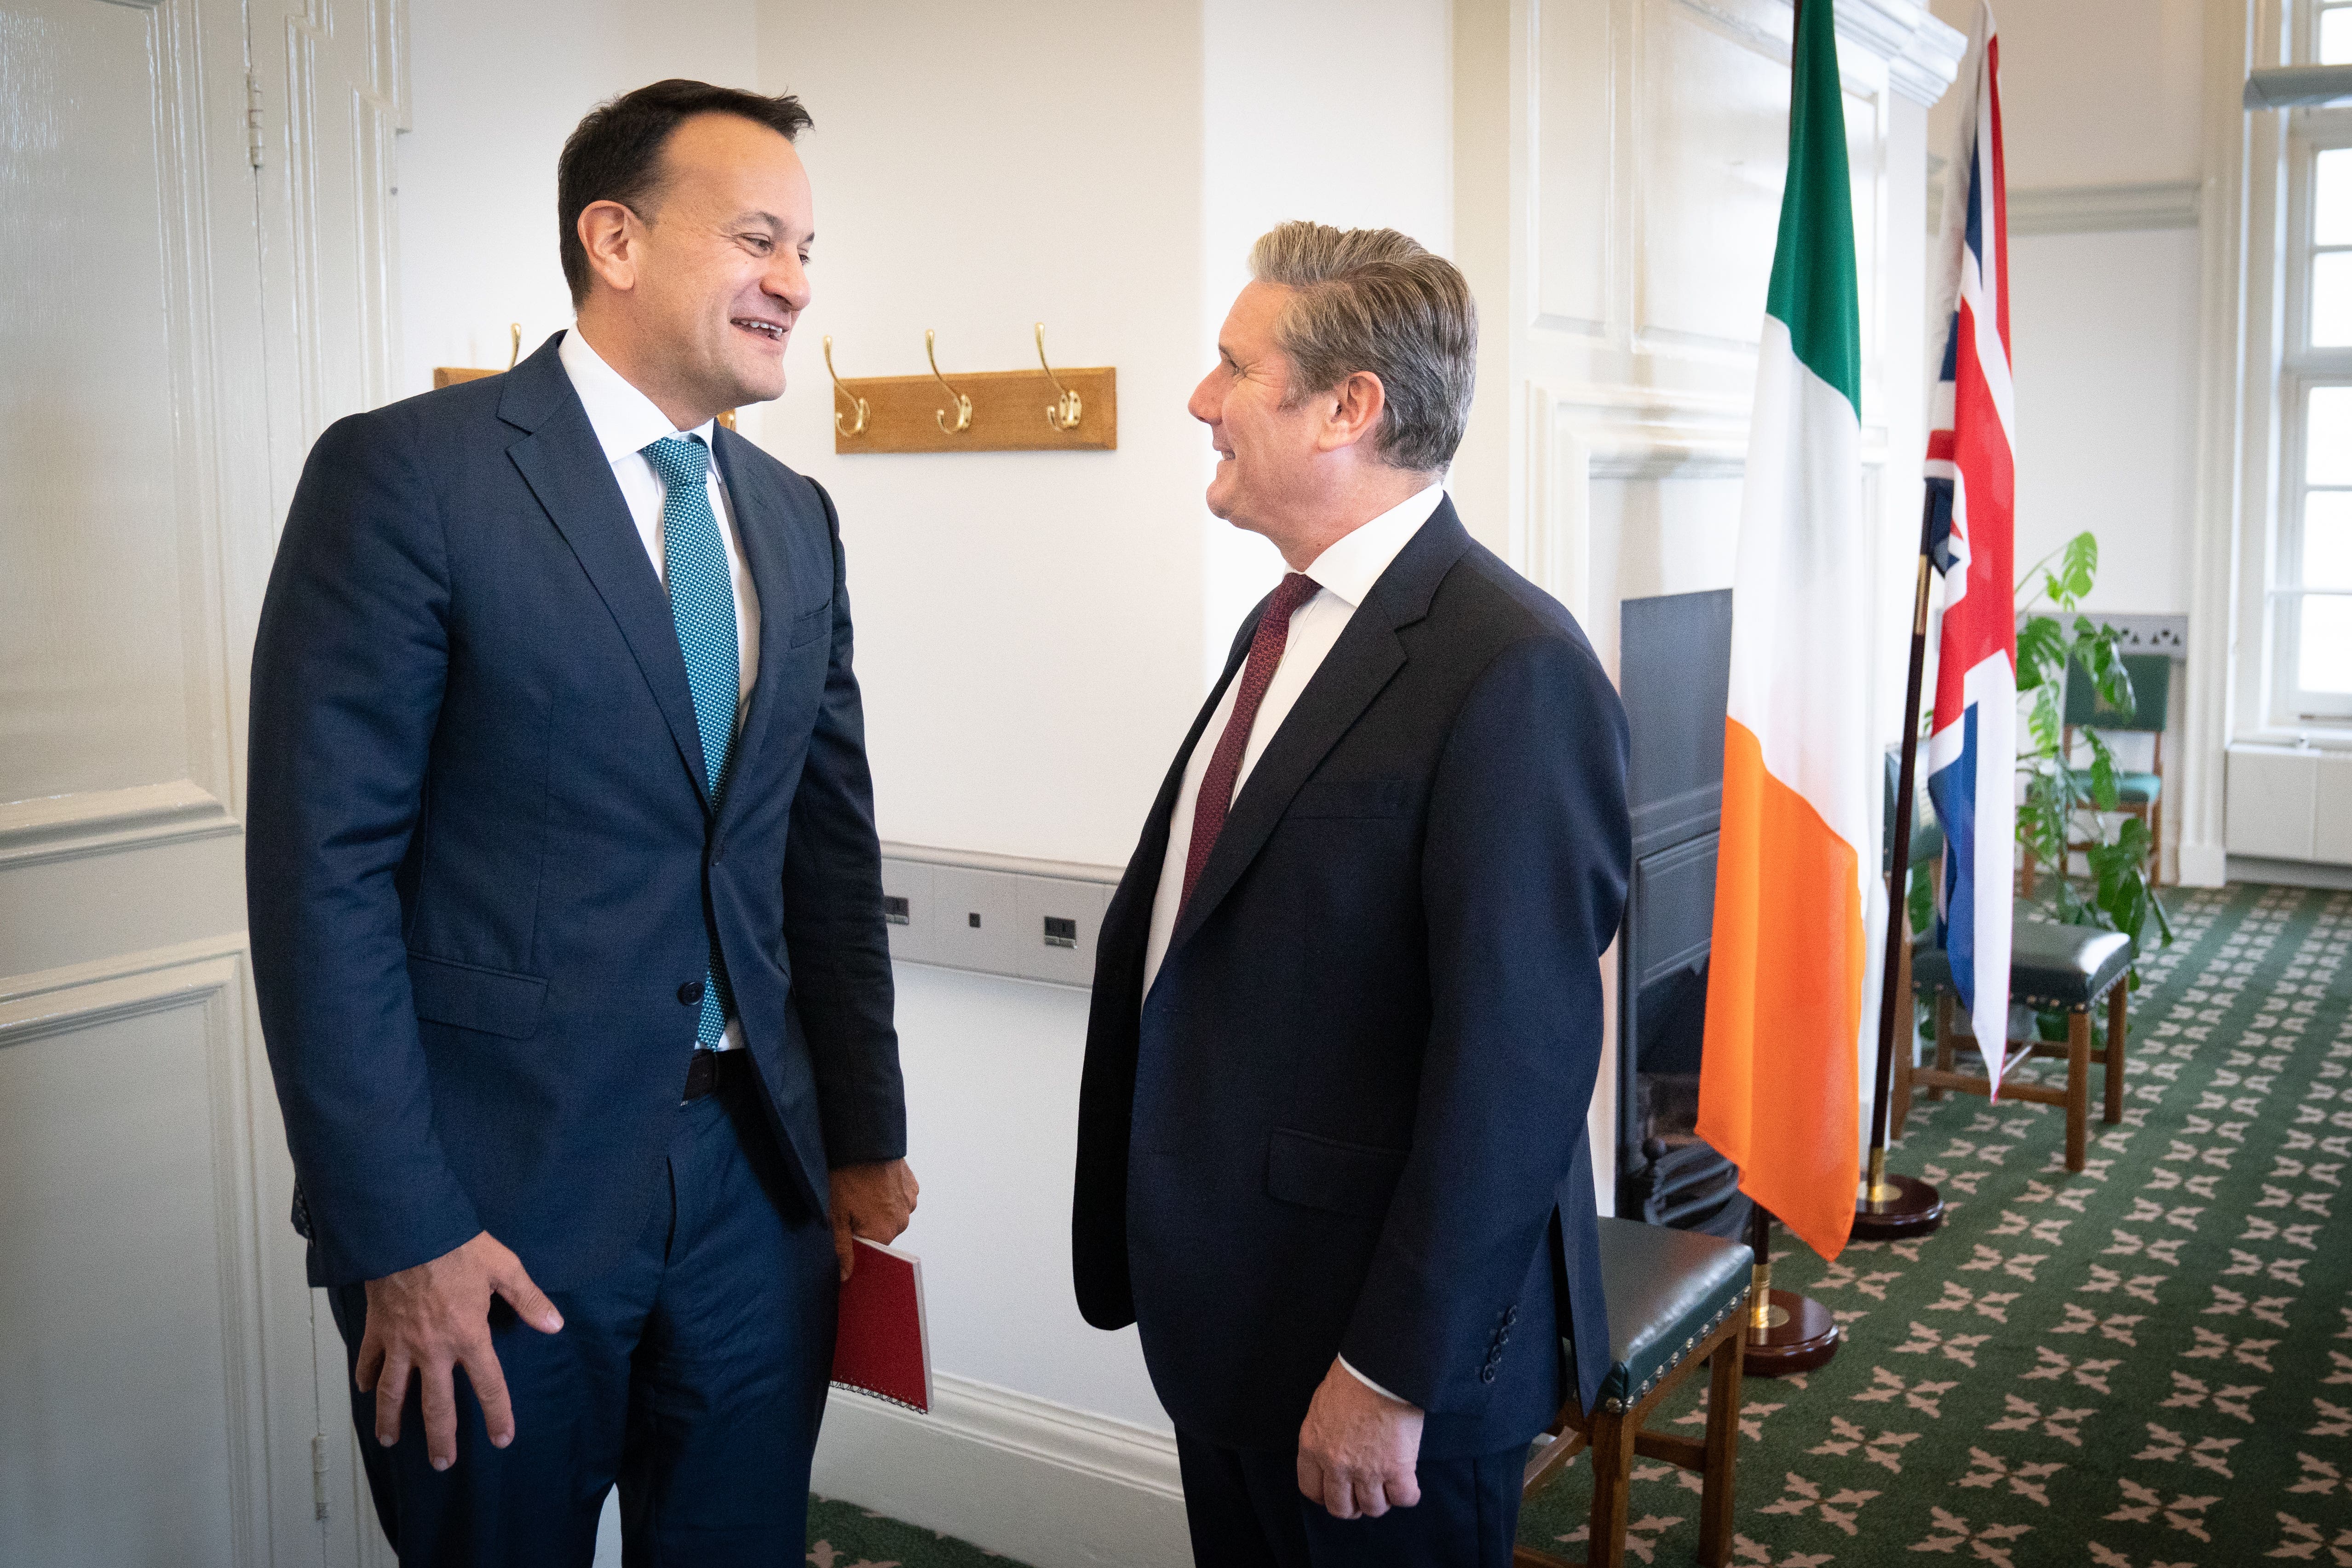 Labour leader Sir Keir Starmer (right) meets with Tanaiste Leo Varadkar in the Houses of Parliament in London, to discuss a range of topics such as Anglo-Irish relations and the trade links between the two nations (Stefan Rousseau/PA)